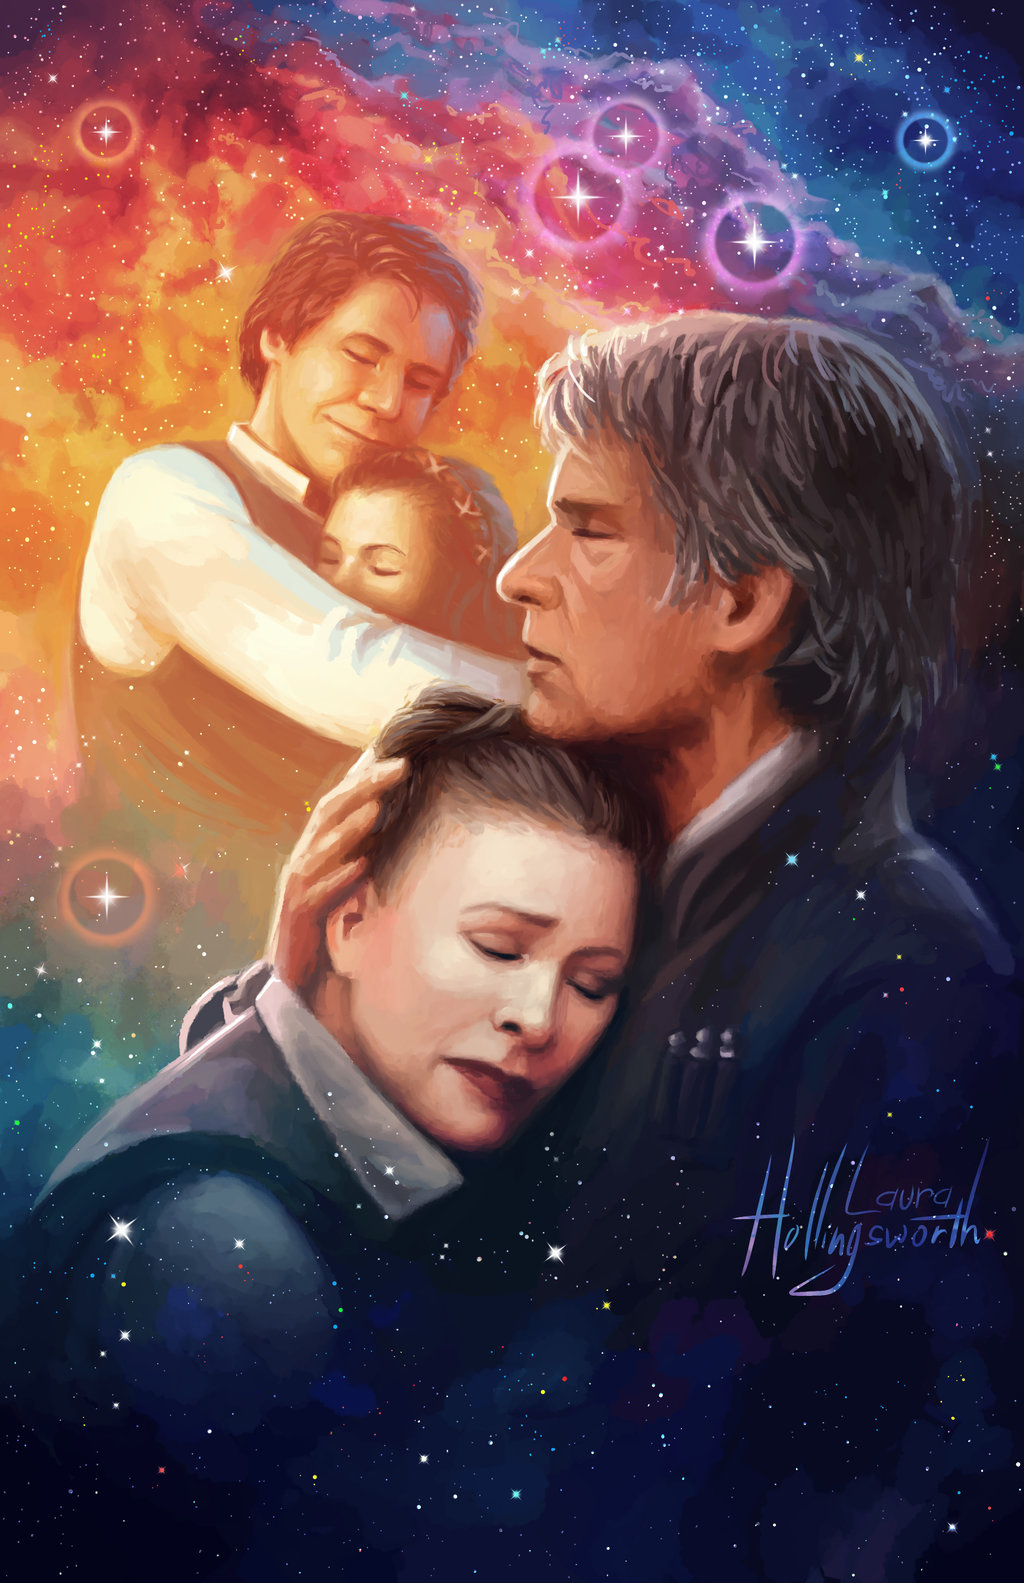 1boy 1girl bad_end couple dual_persona epic good_end grey_hair han_solo highres hug husband_and_wife jacket laura_hollingsworth old princess_leia_organa_solo realistic sad science_fiction signature sky space spoilers star_(sky) star_wars star_wars:_the_force_awakens starry_sky vest younger